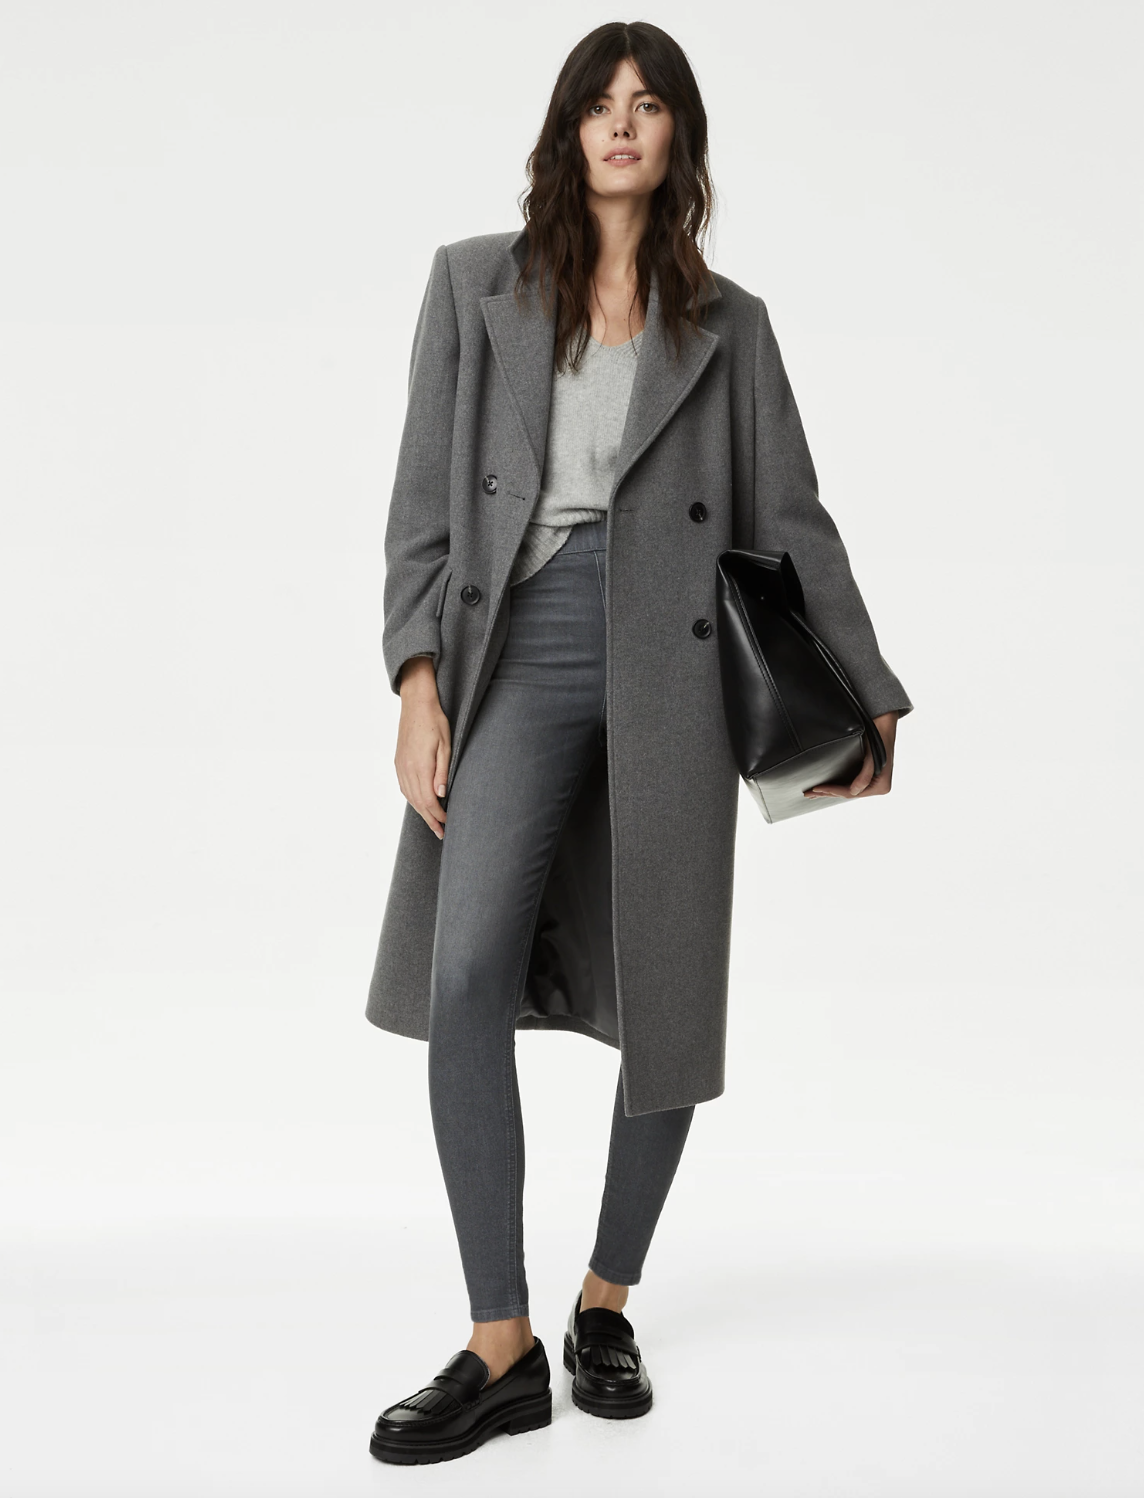 Dress this pair of jeggings up with loafers, a cosy knit and smart wool coat. (Marks & Spencer)